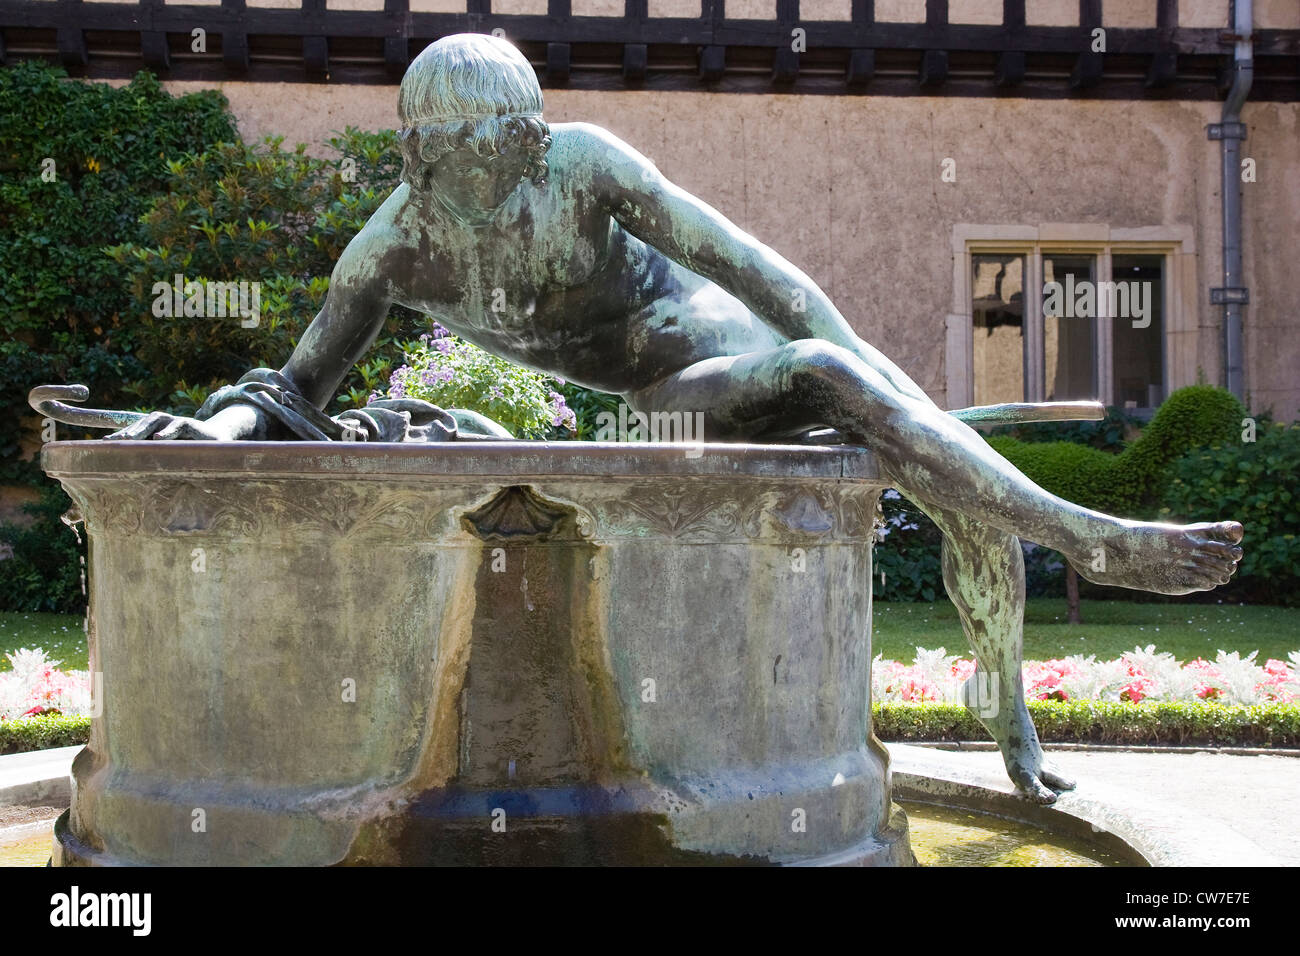 Europe, Germany, Brandenburg, Potsdam, Cecilienhof, where took place the Potsdam Conference in 1945, statue and fountain Stock Photo